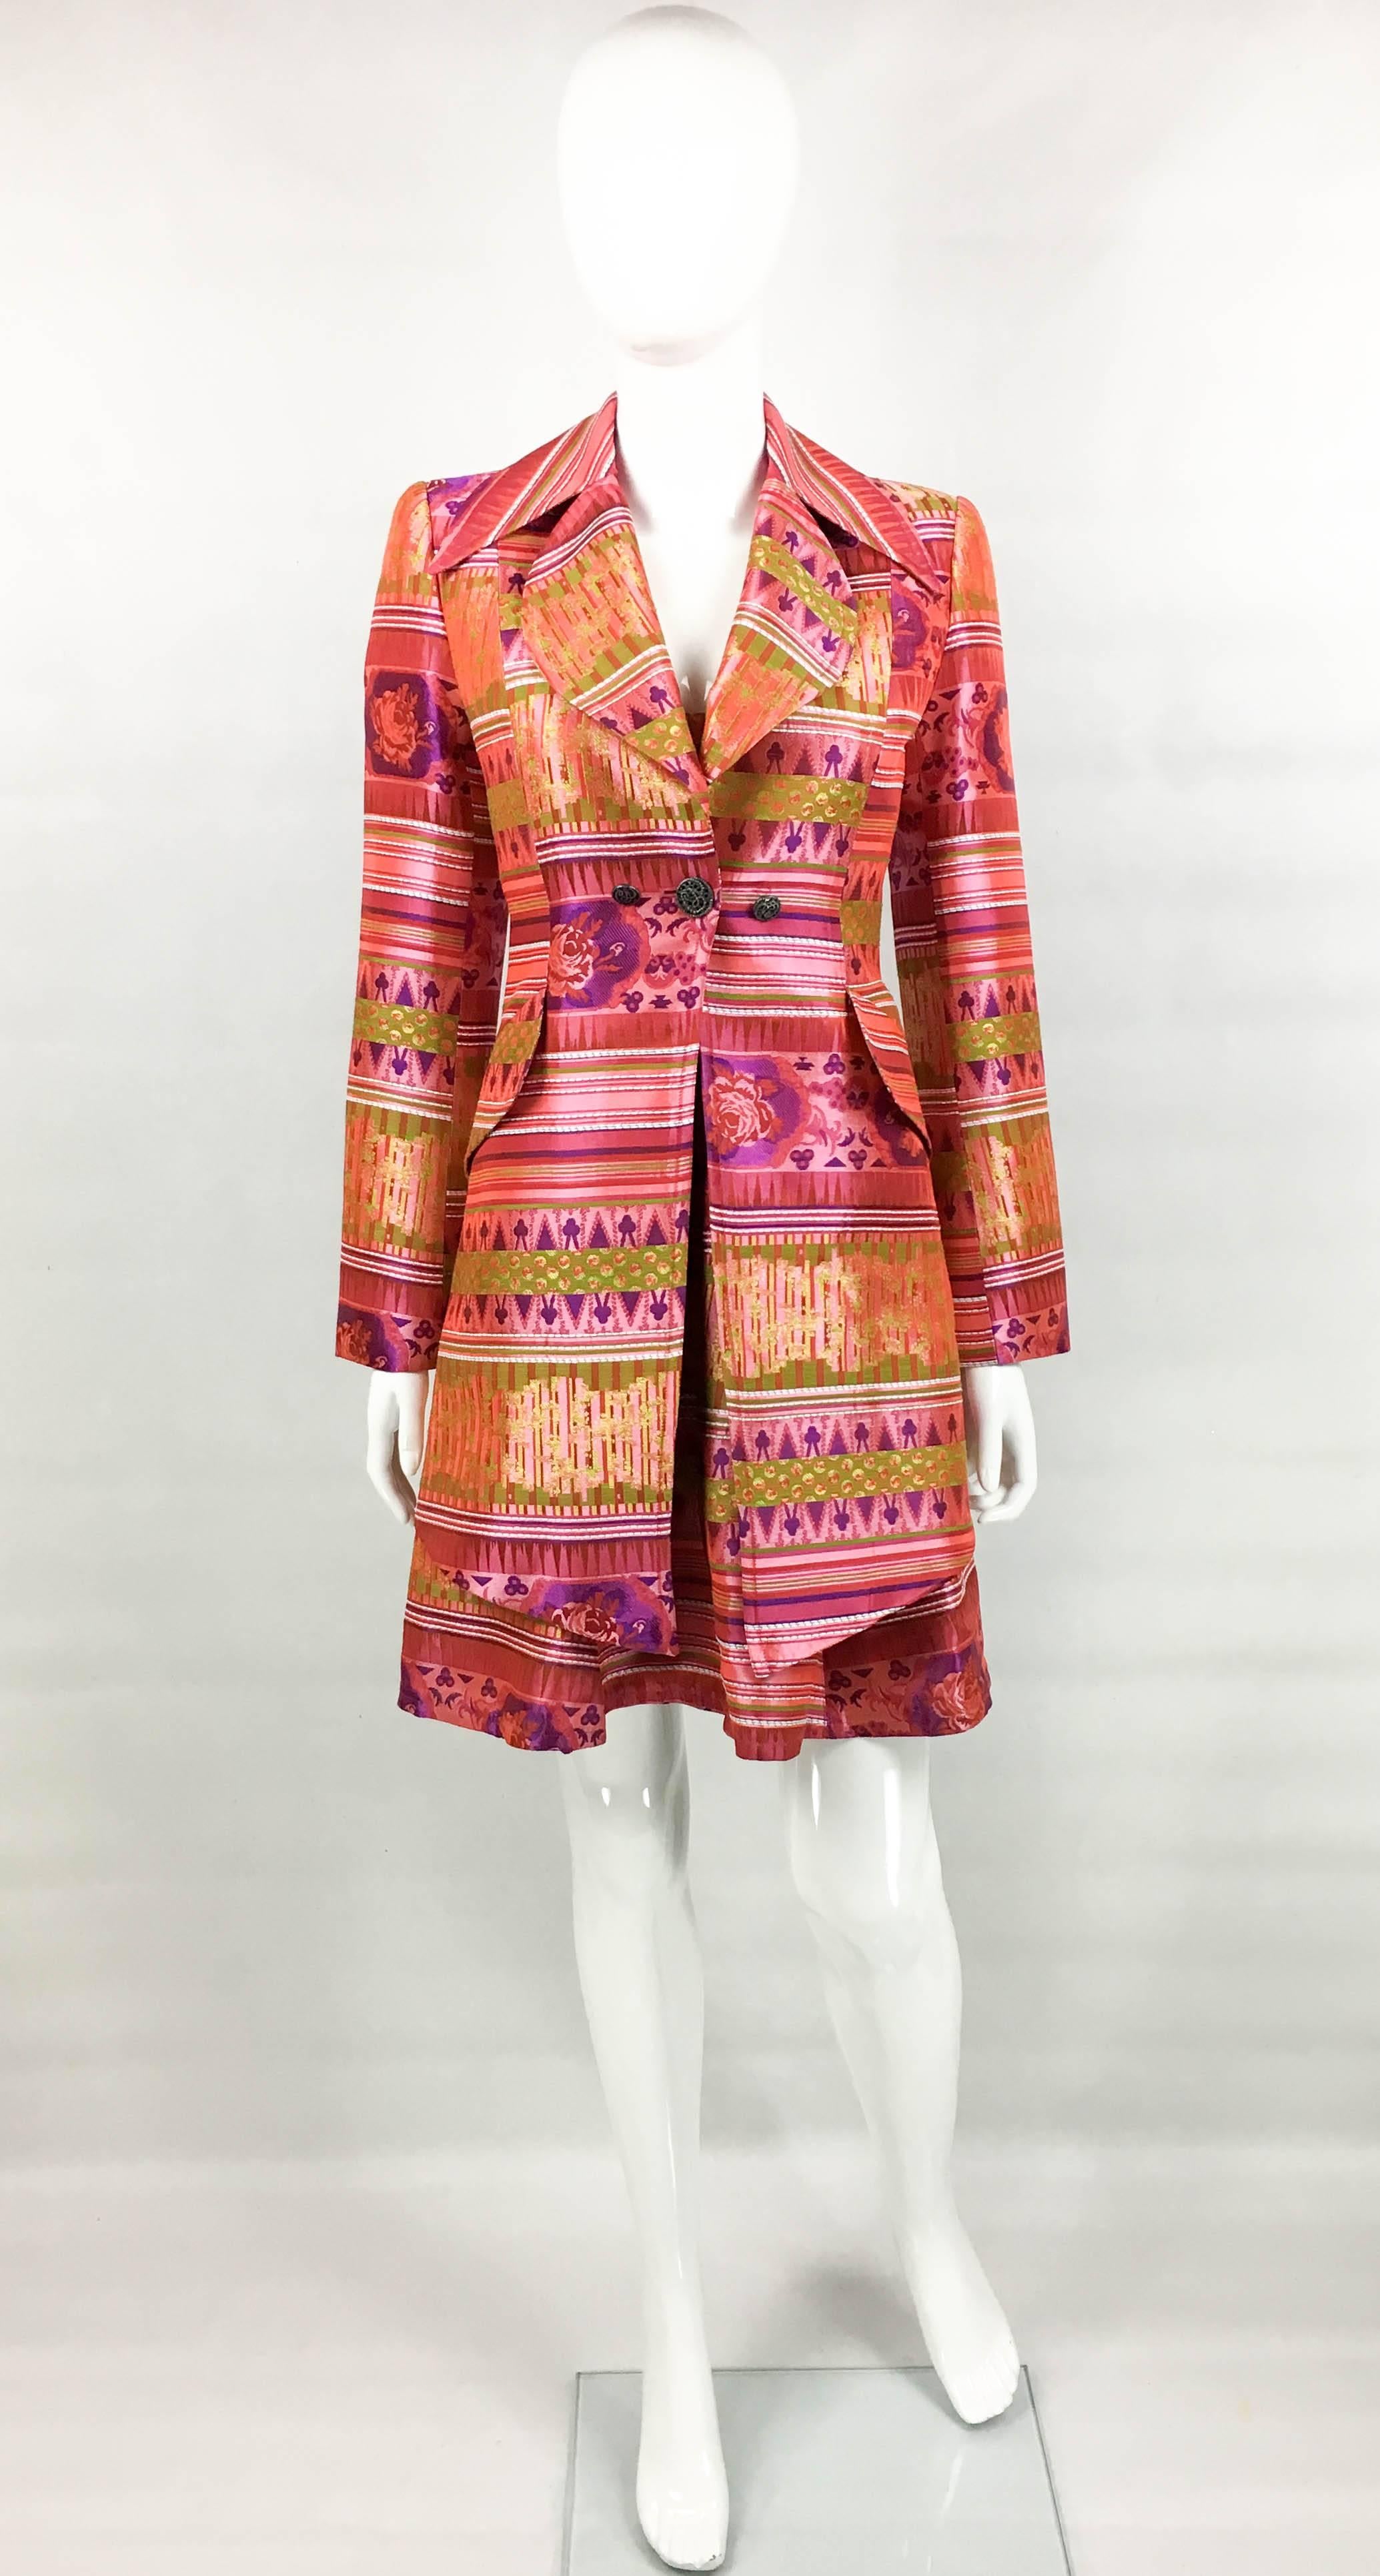 Fabulous Vintage Christian Lacroix Dress and Jacket Ensemble. These stunning 1990s piece by Lacroix are a show-stopper. Comprising of a bustier dress and a long jacket, this ensemble is made in a bold patterned brocade predominantly in pink. The